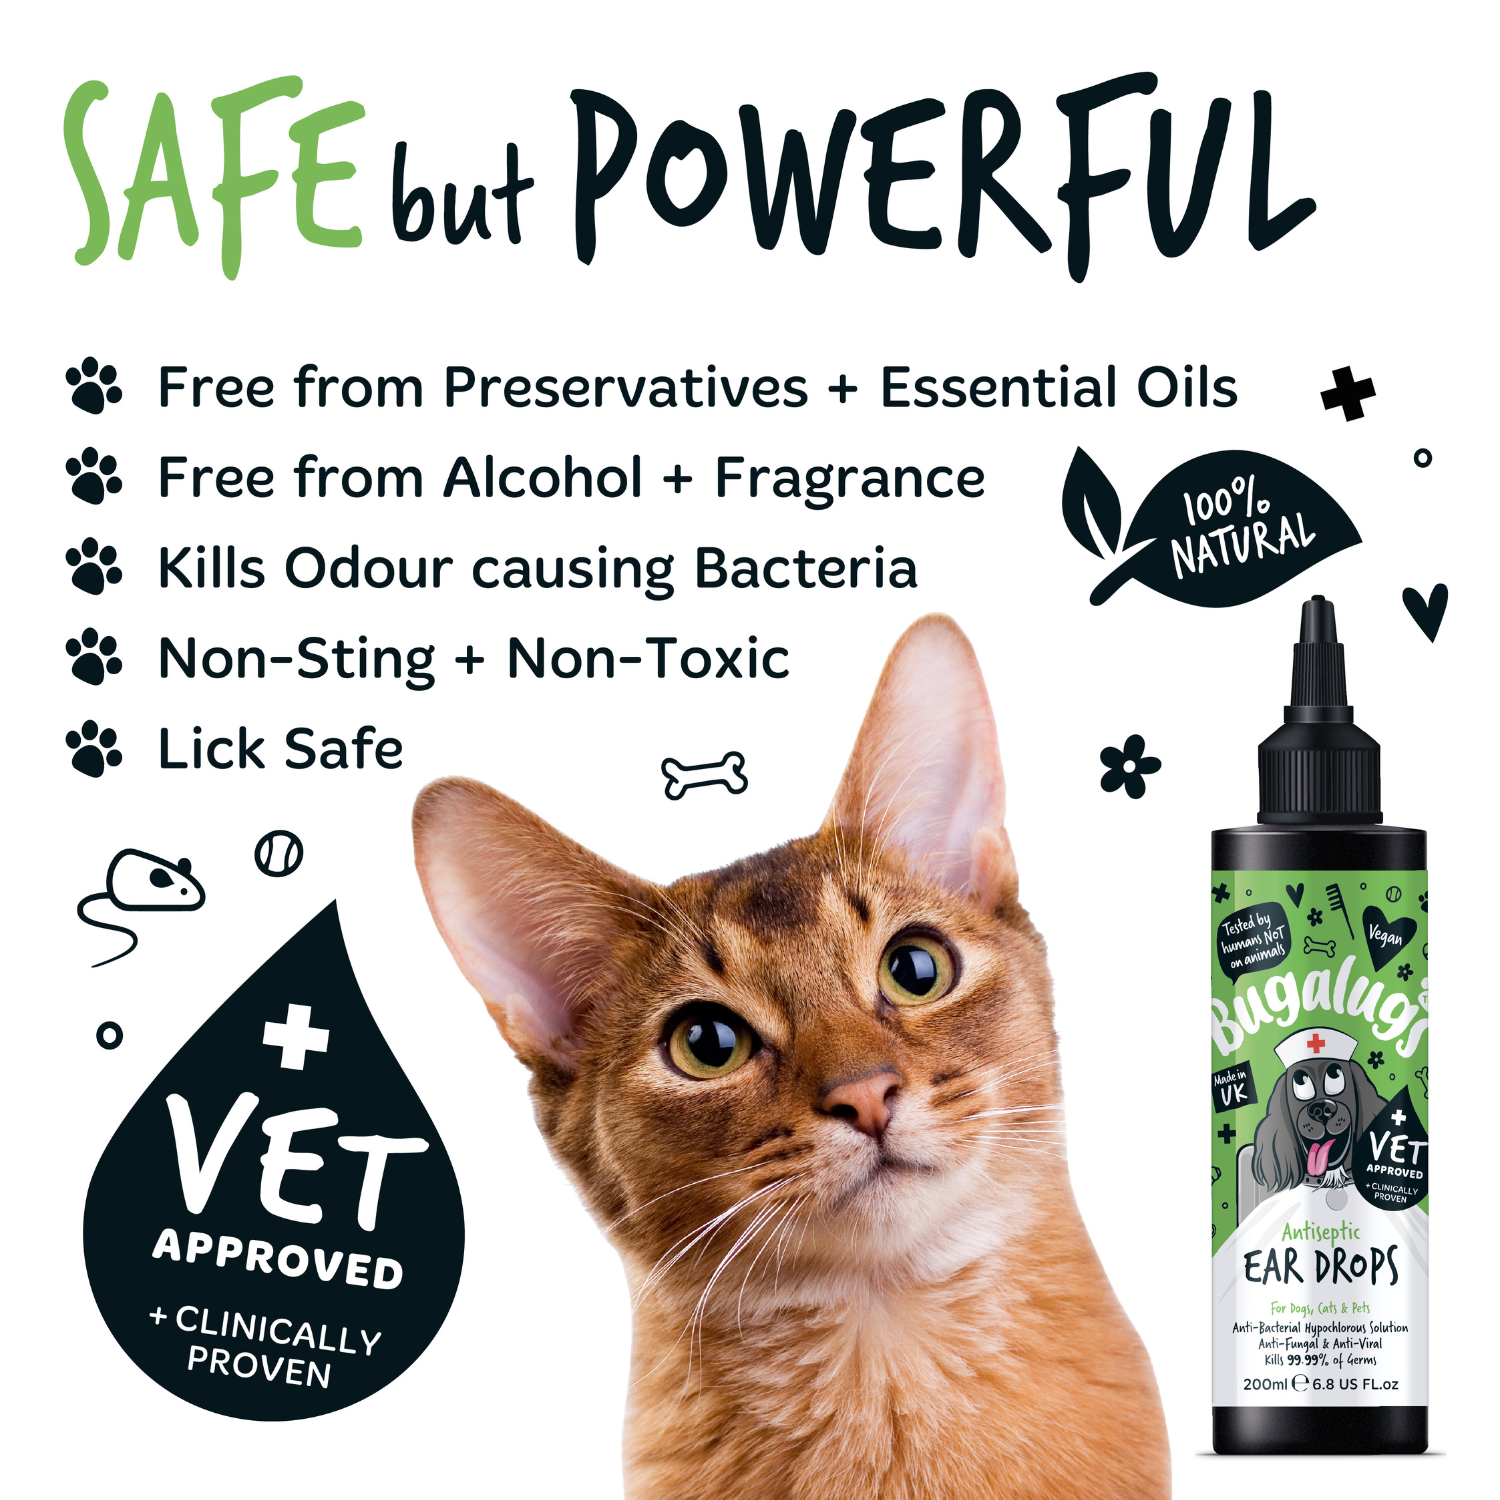 Bugalugs Antiseptic Ear Drops for Dogs, Cats and Pets - Safe but powerful